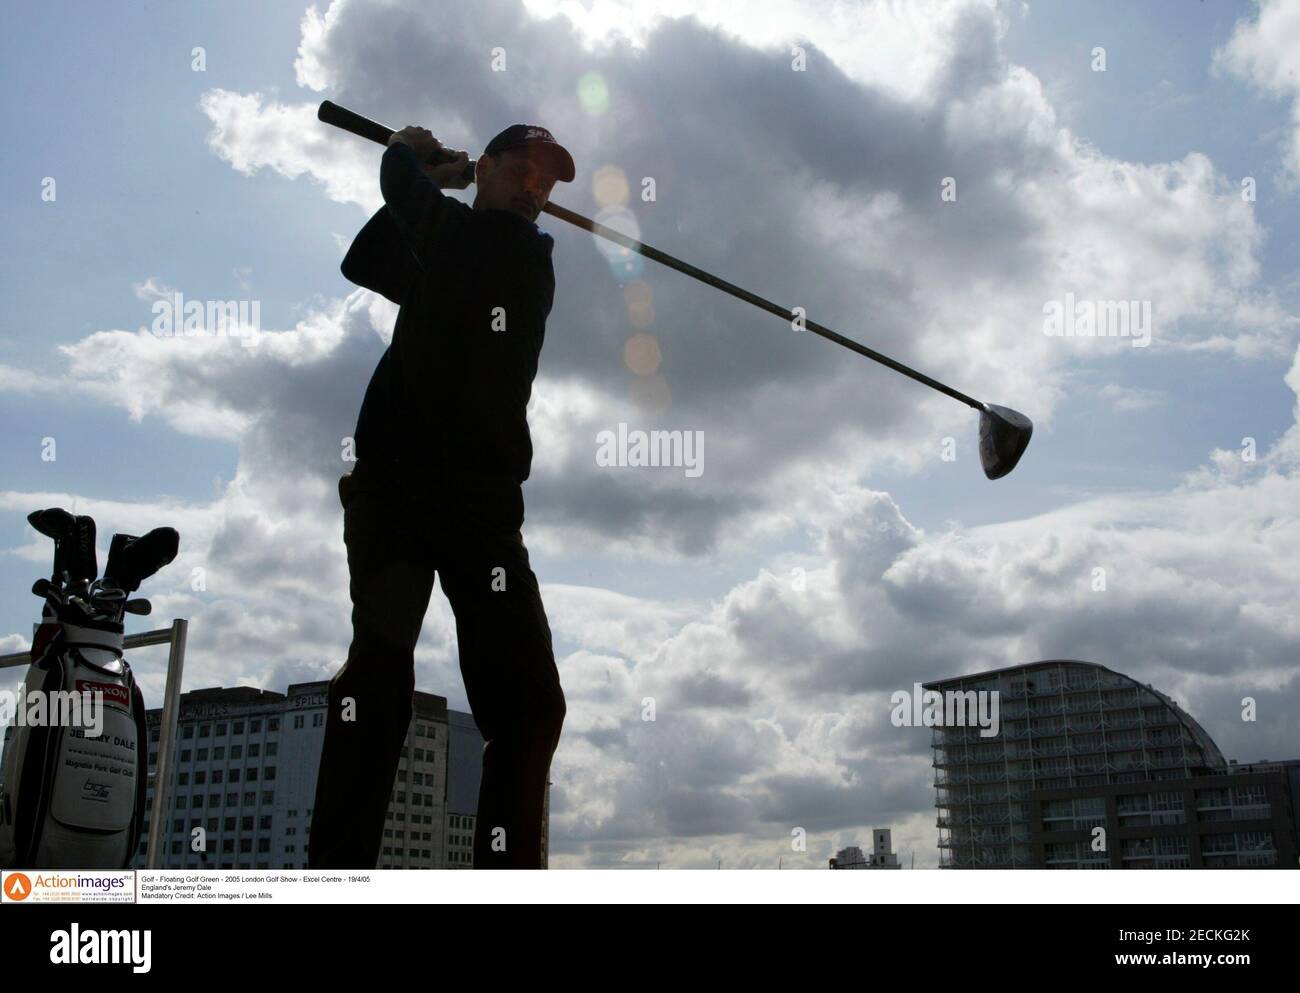 Golf - Floating Golf Green - 2005 London Golf Show - Excel Centre - 19/4/05  England's Jeremy Dale Mandatory Credit: Action Images / Lee Mills Stock  Photo - Alamy